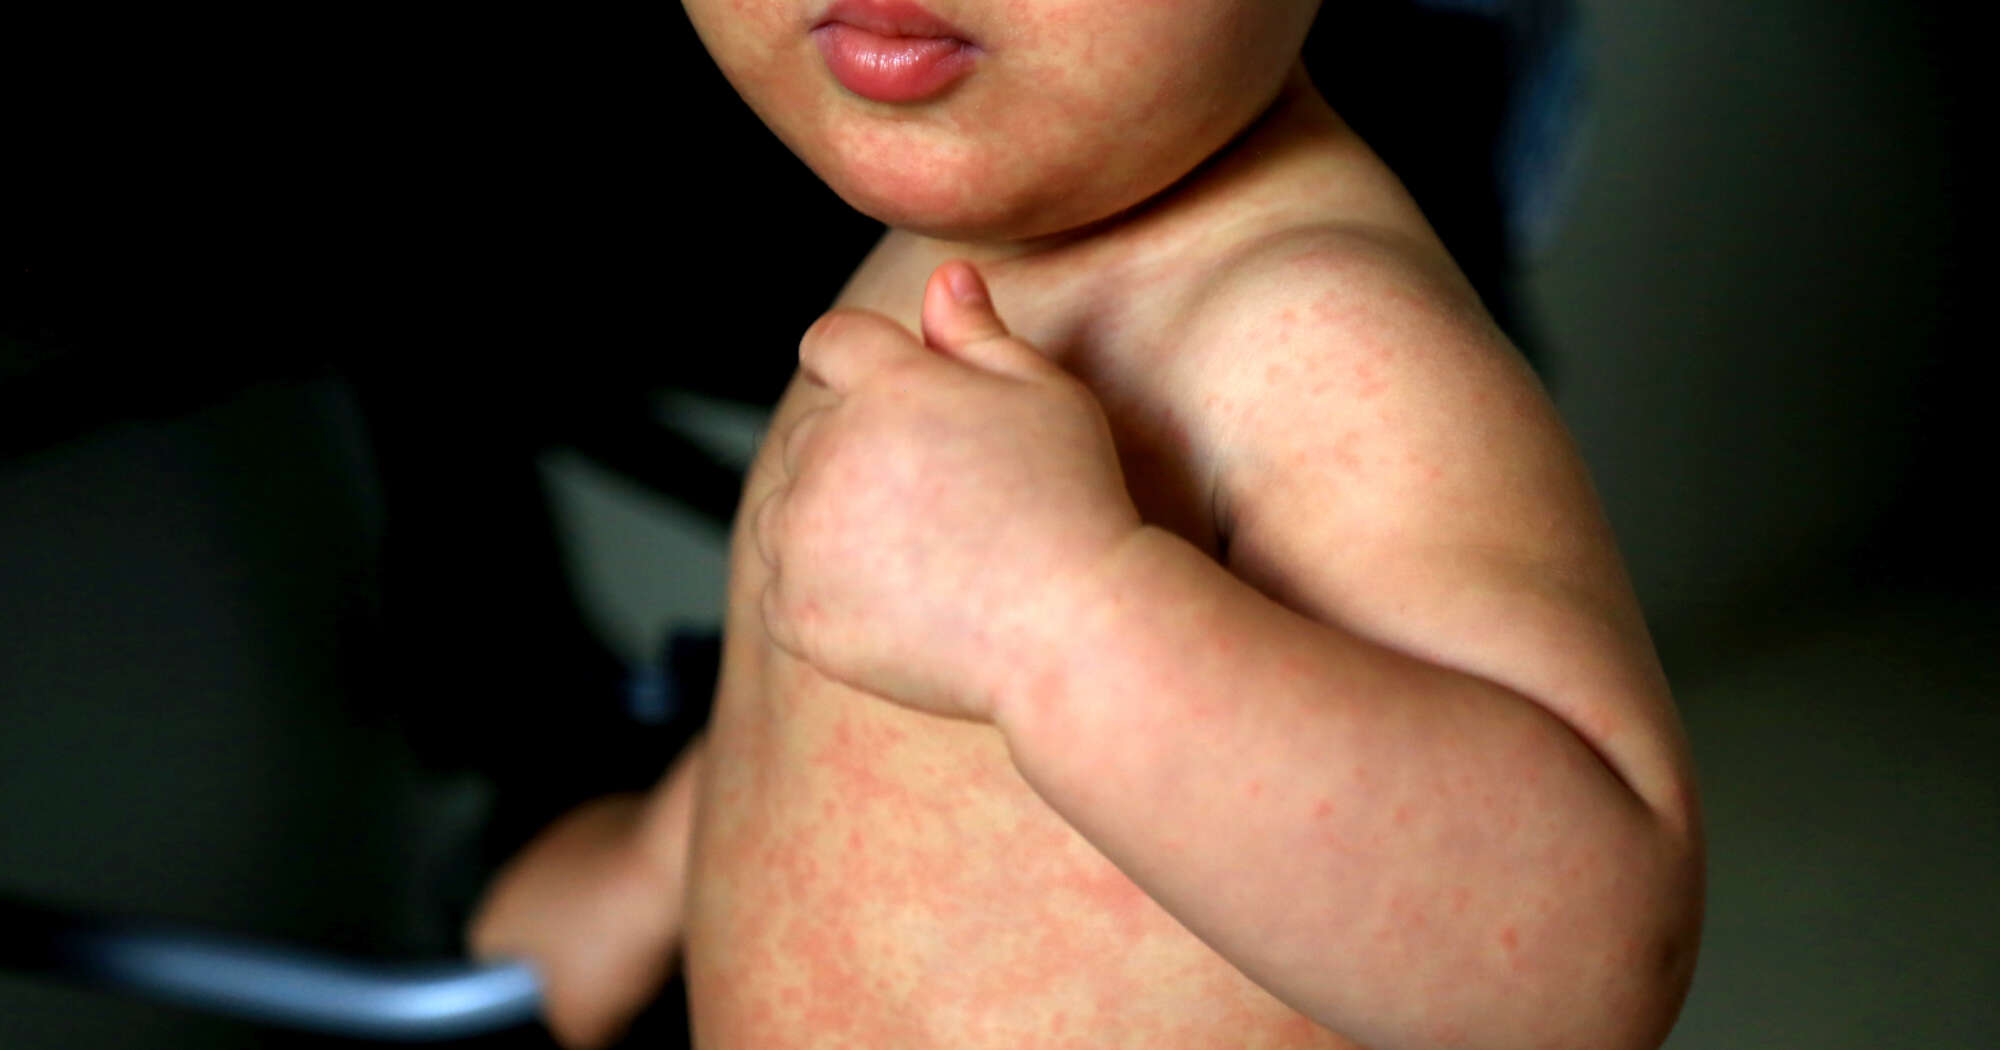 Image of SALVADOR, BAHIA / BRAZIL - February 14, 2017: Child with measles symptoms is seen with small red spots on body and feverish state.